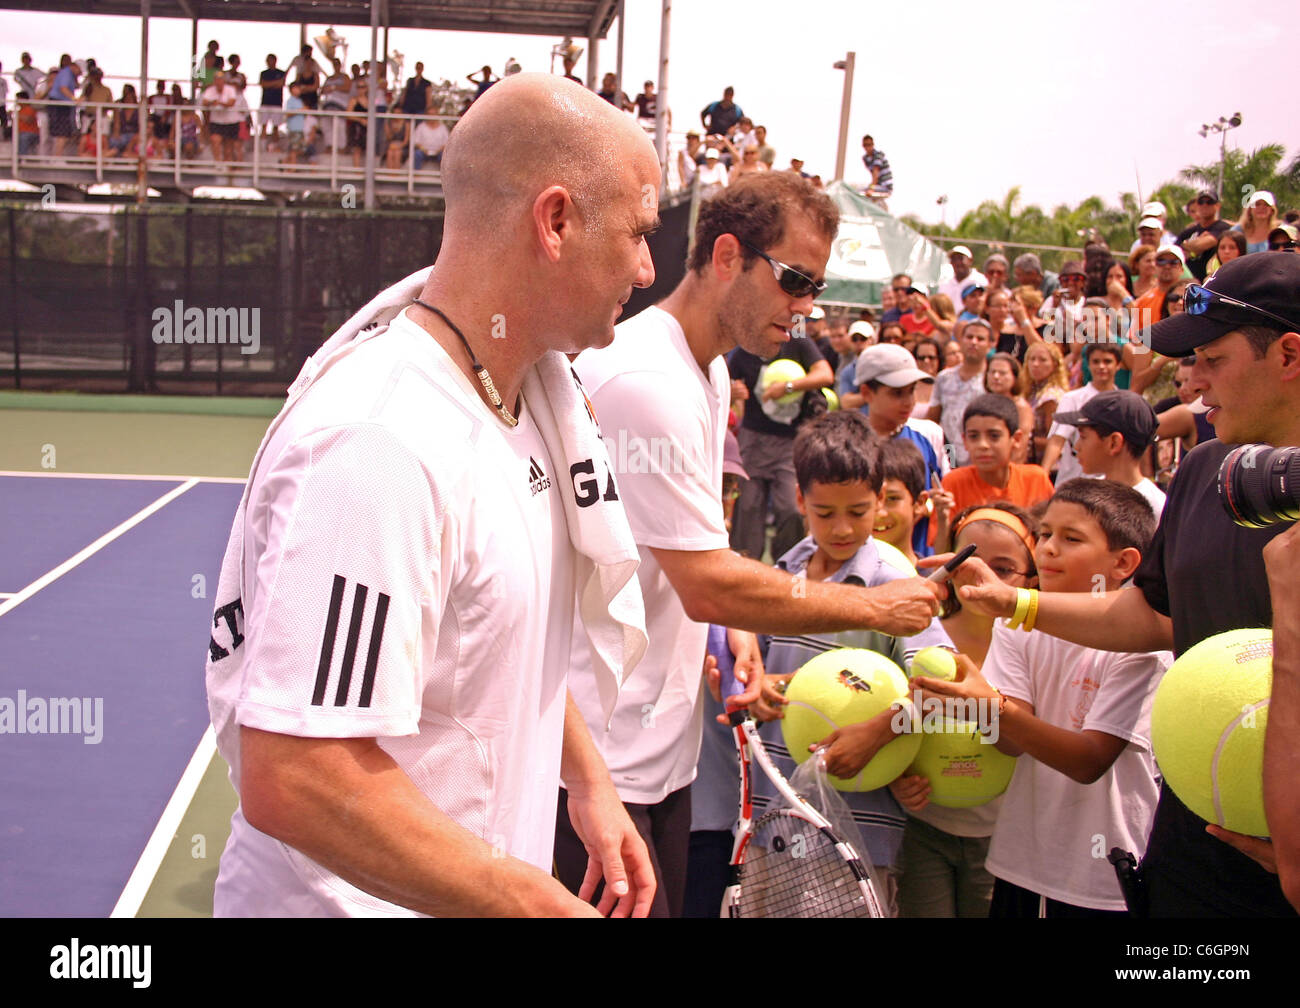 Retired US tennis champions Andre Agassi and Pete Sampras open a free Tennis Clinic to encourage young children to get into the Stock Photo